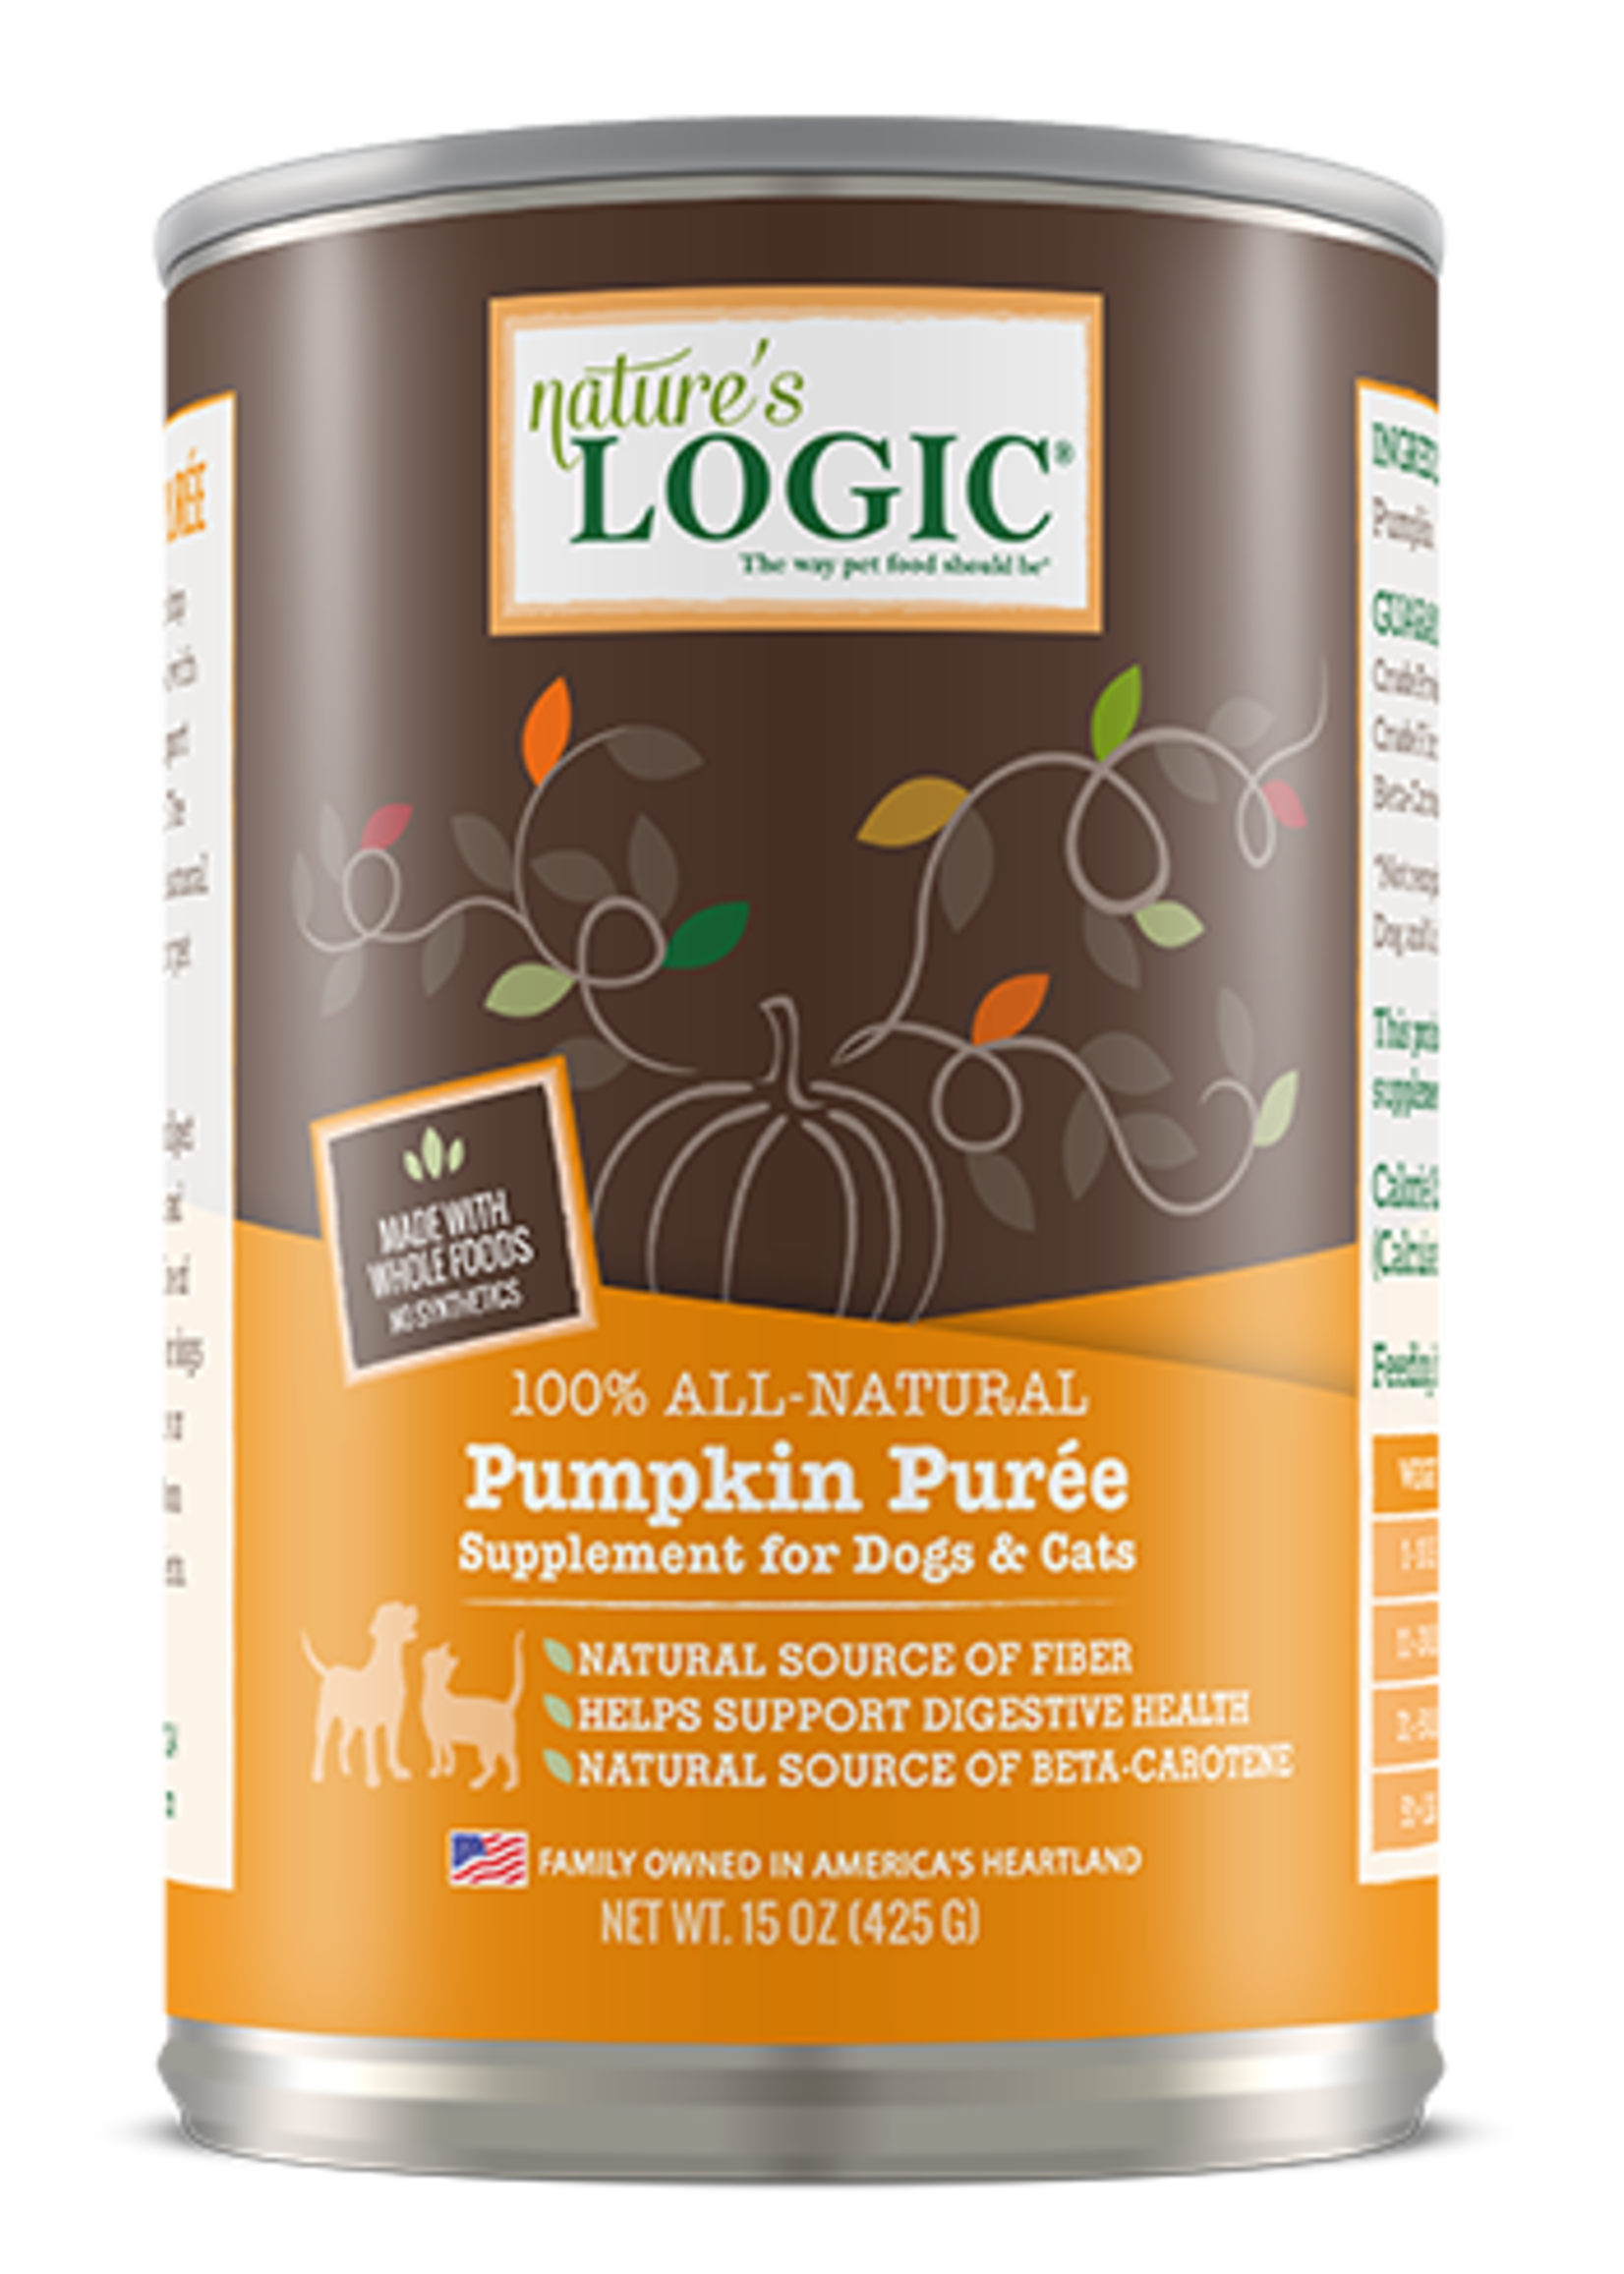 Nature's Logic Nature's Logic Pumpkin Puree Supplement for Dogs & Cats 15-oz